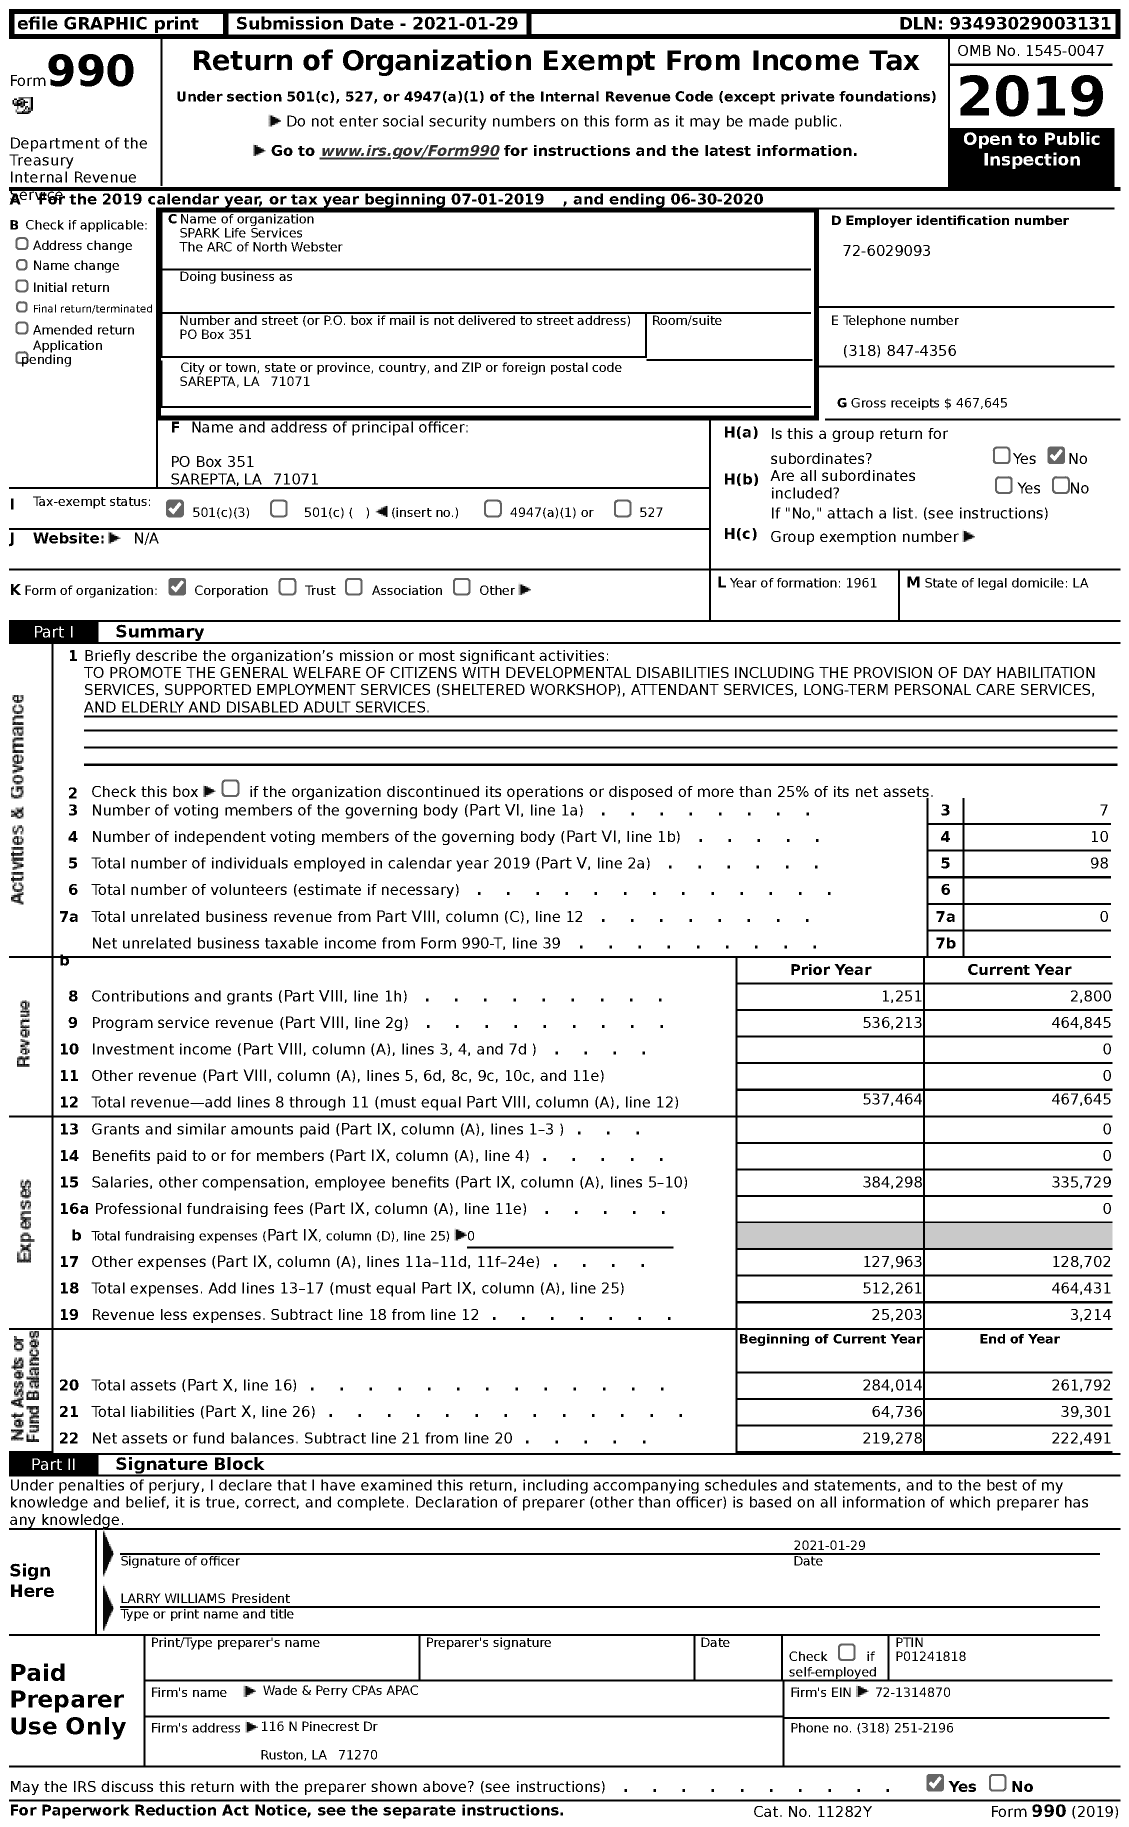 Image of first page of 2019 Form 990 for SPARK Life Services The ARC of North Webster